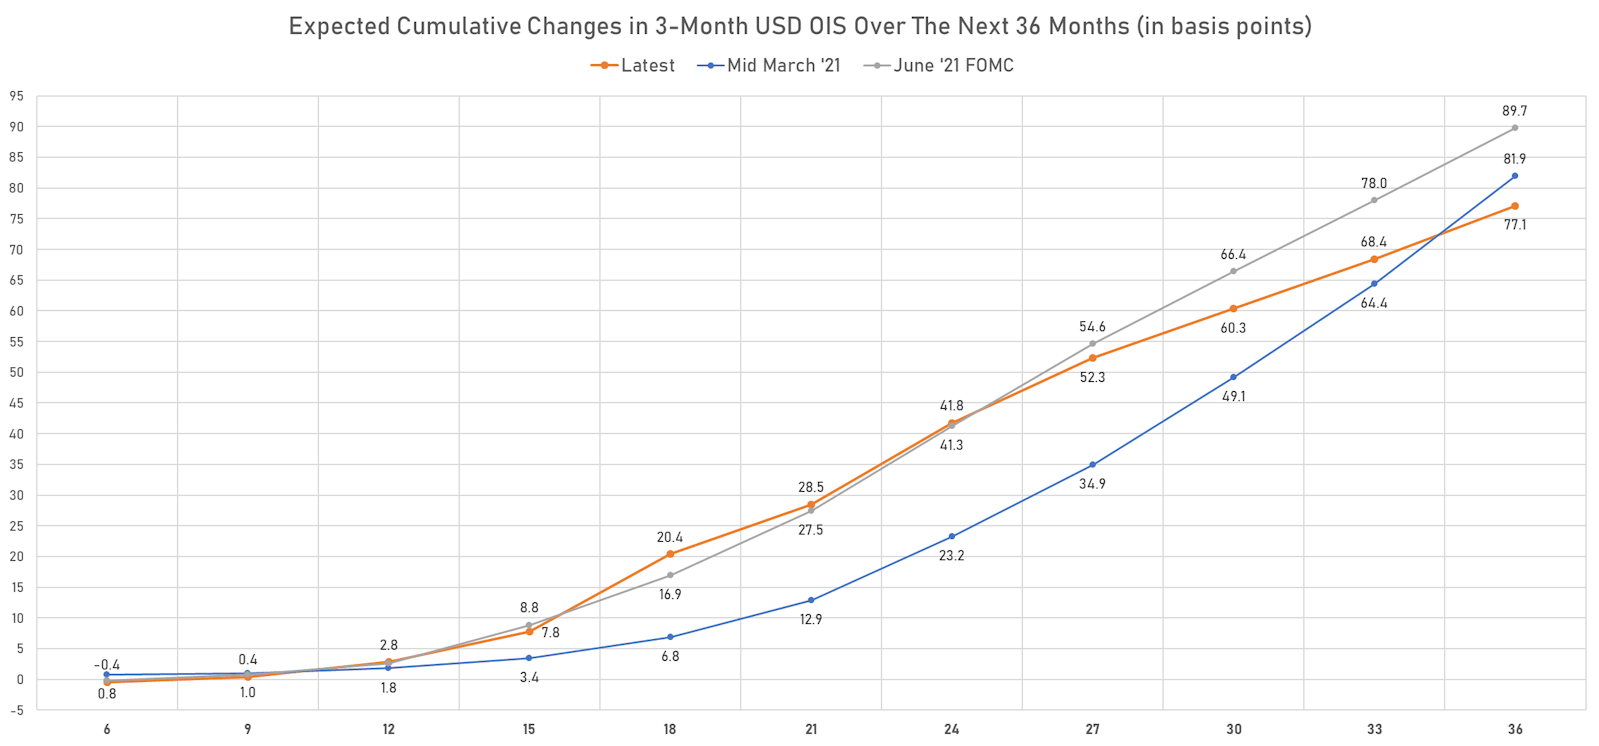 Implied Rate Hikes Derived From The 3-Month USD OIS Forward Curve | Sources: ϕpost, Refinitiv data